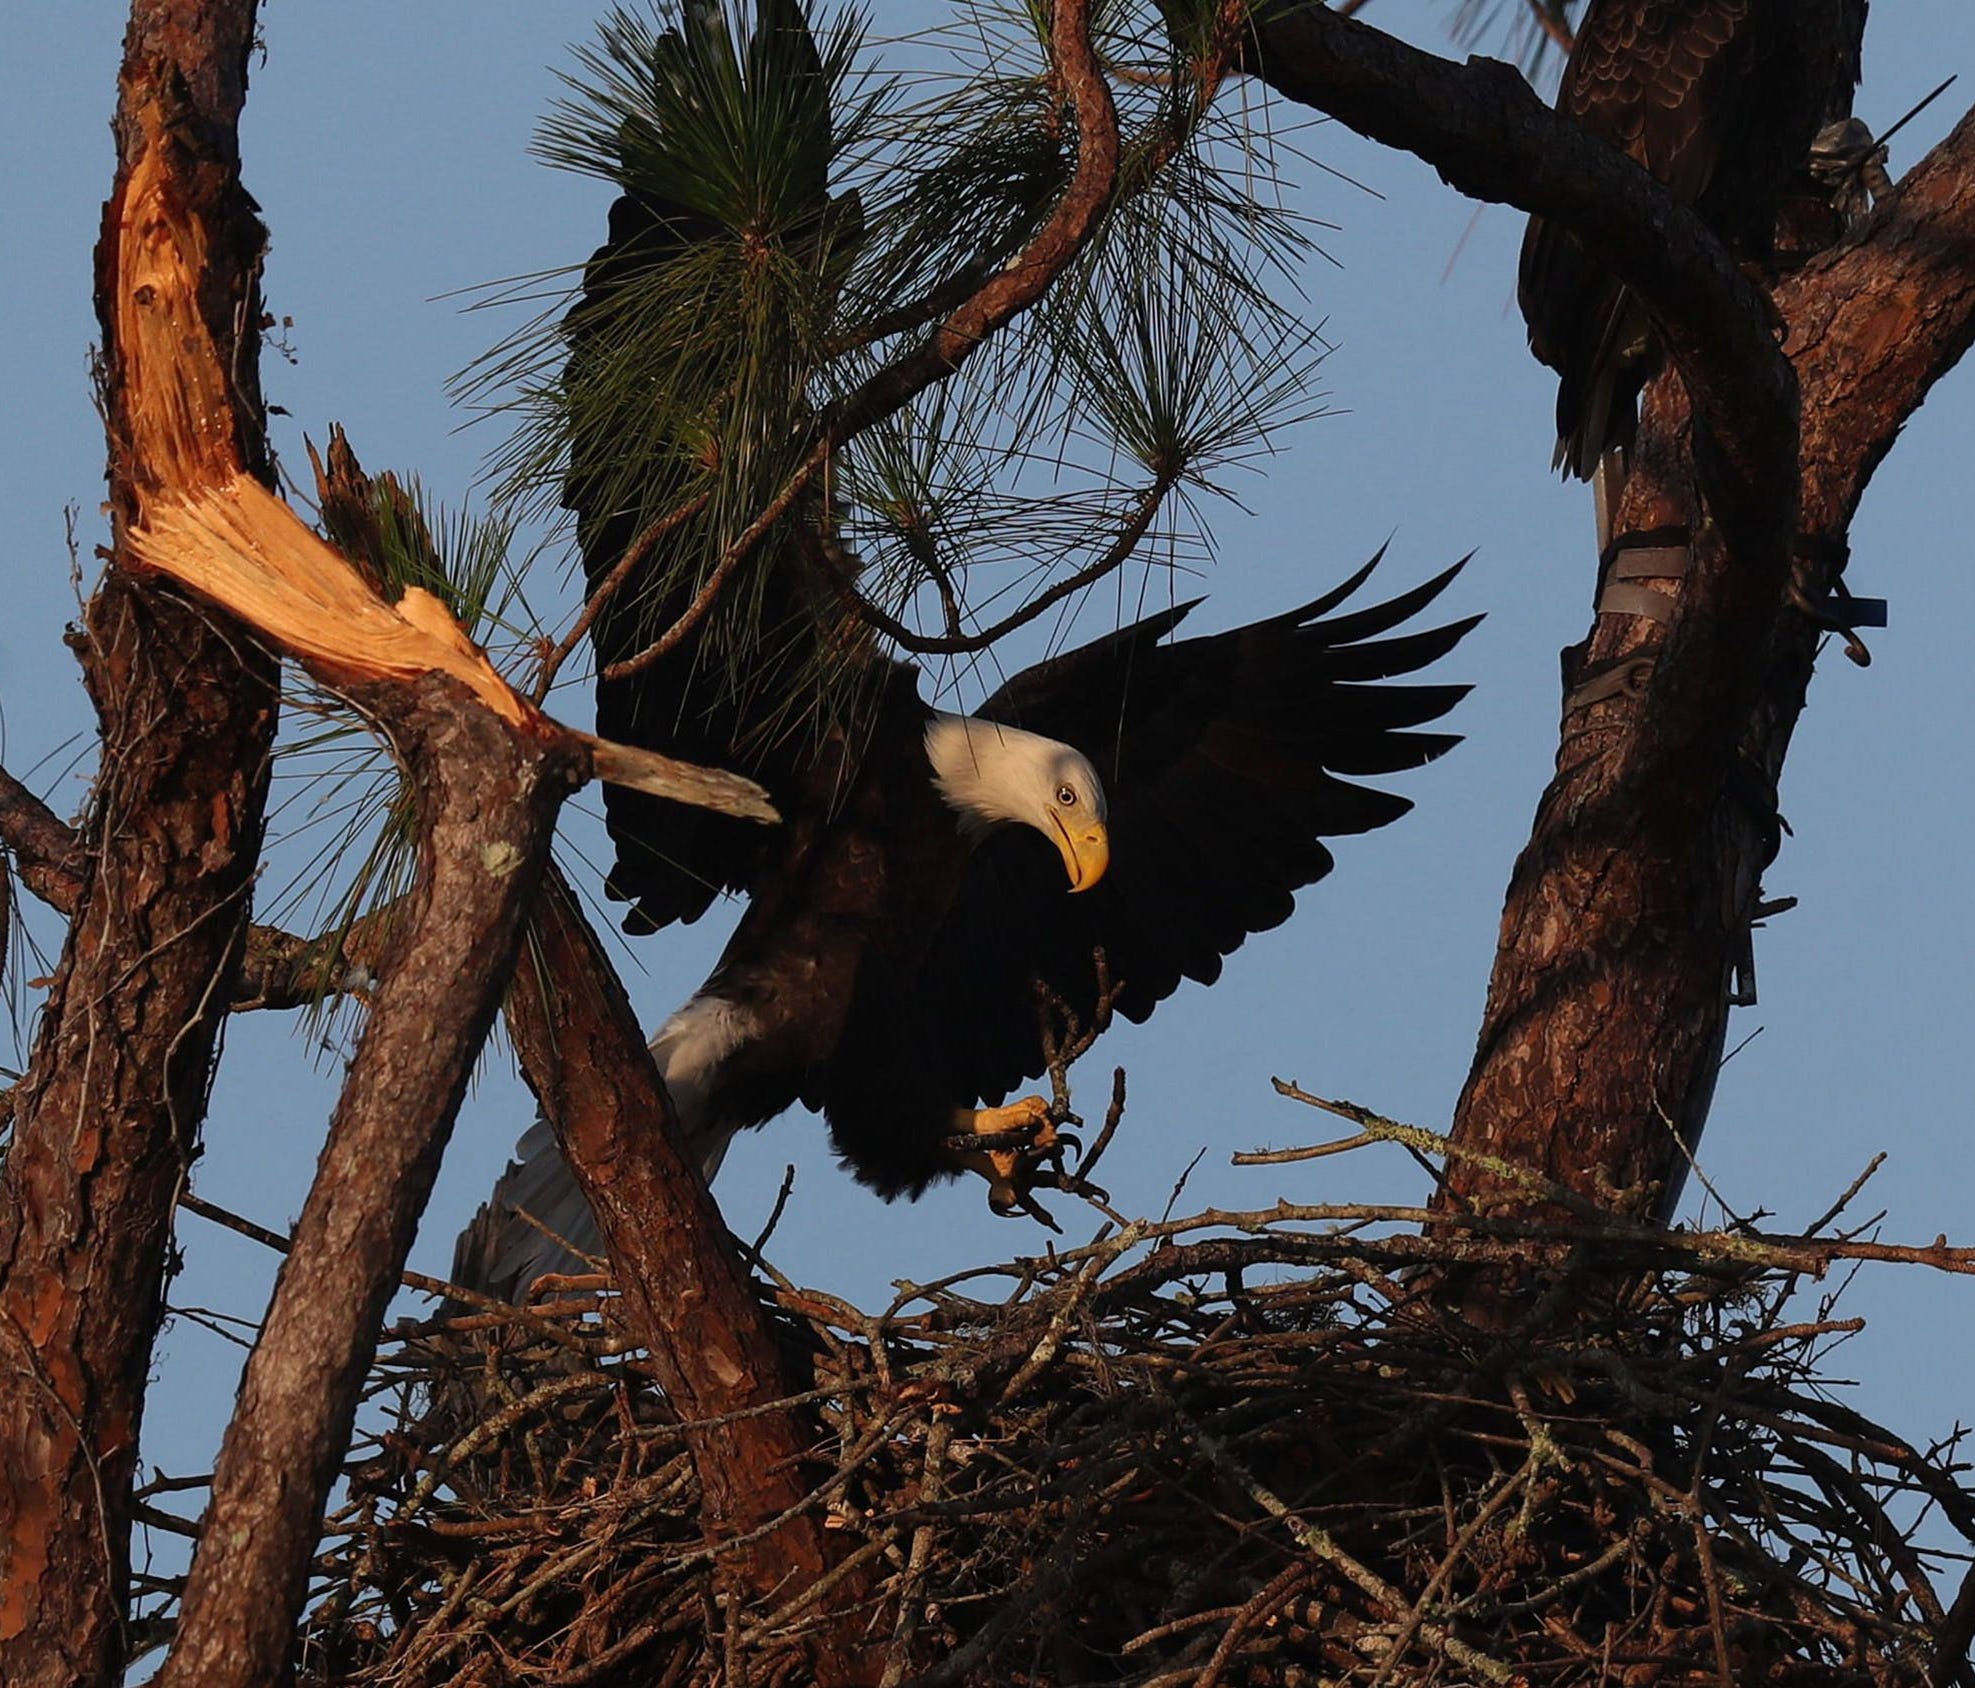 Harriet and M15 were seen Sept. 22, 2017, bringing nesting material to the nest. The first eaglet hatched Tuesday, Dec. 26, 2017.